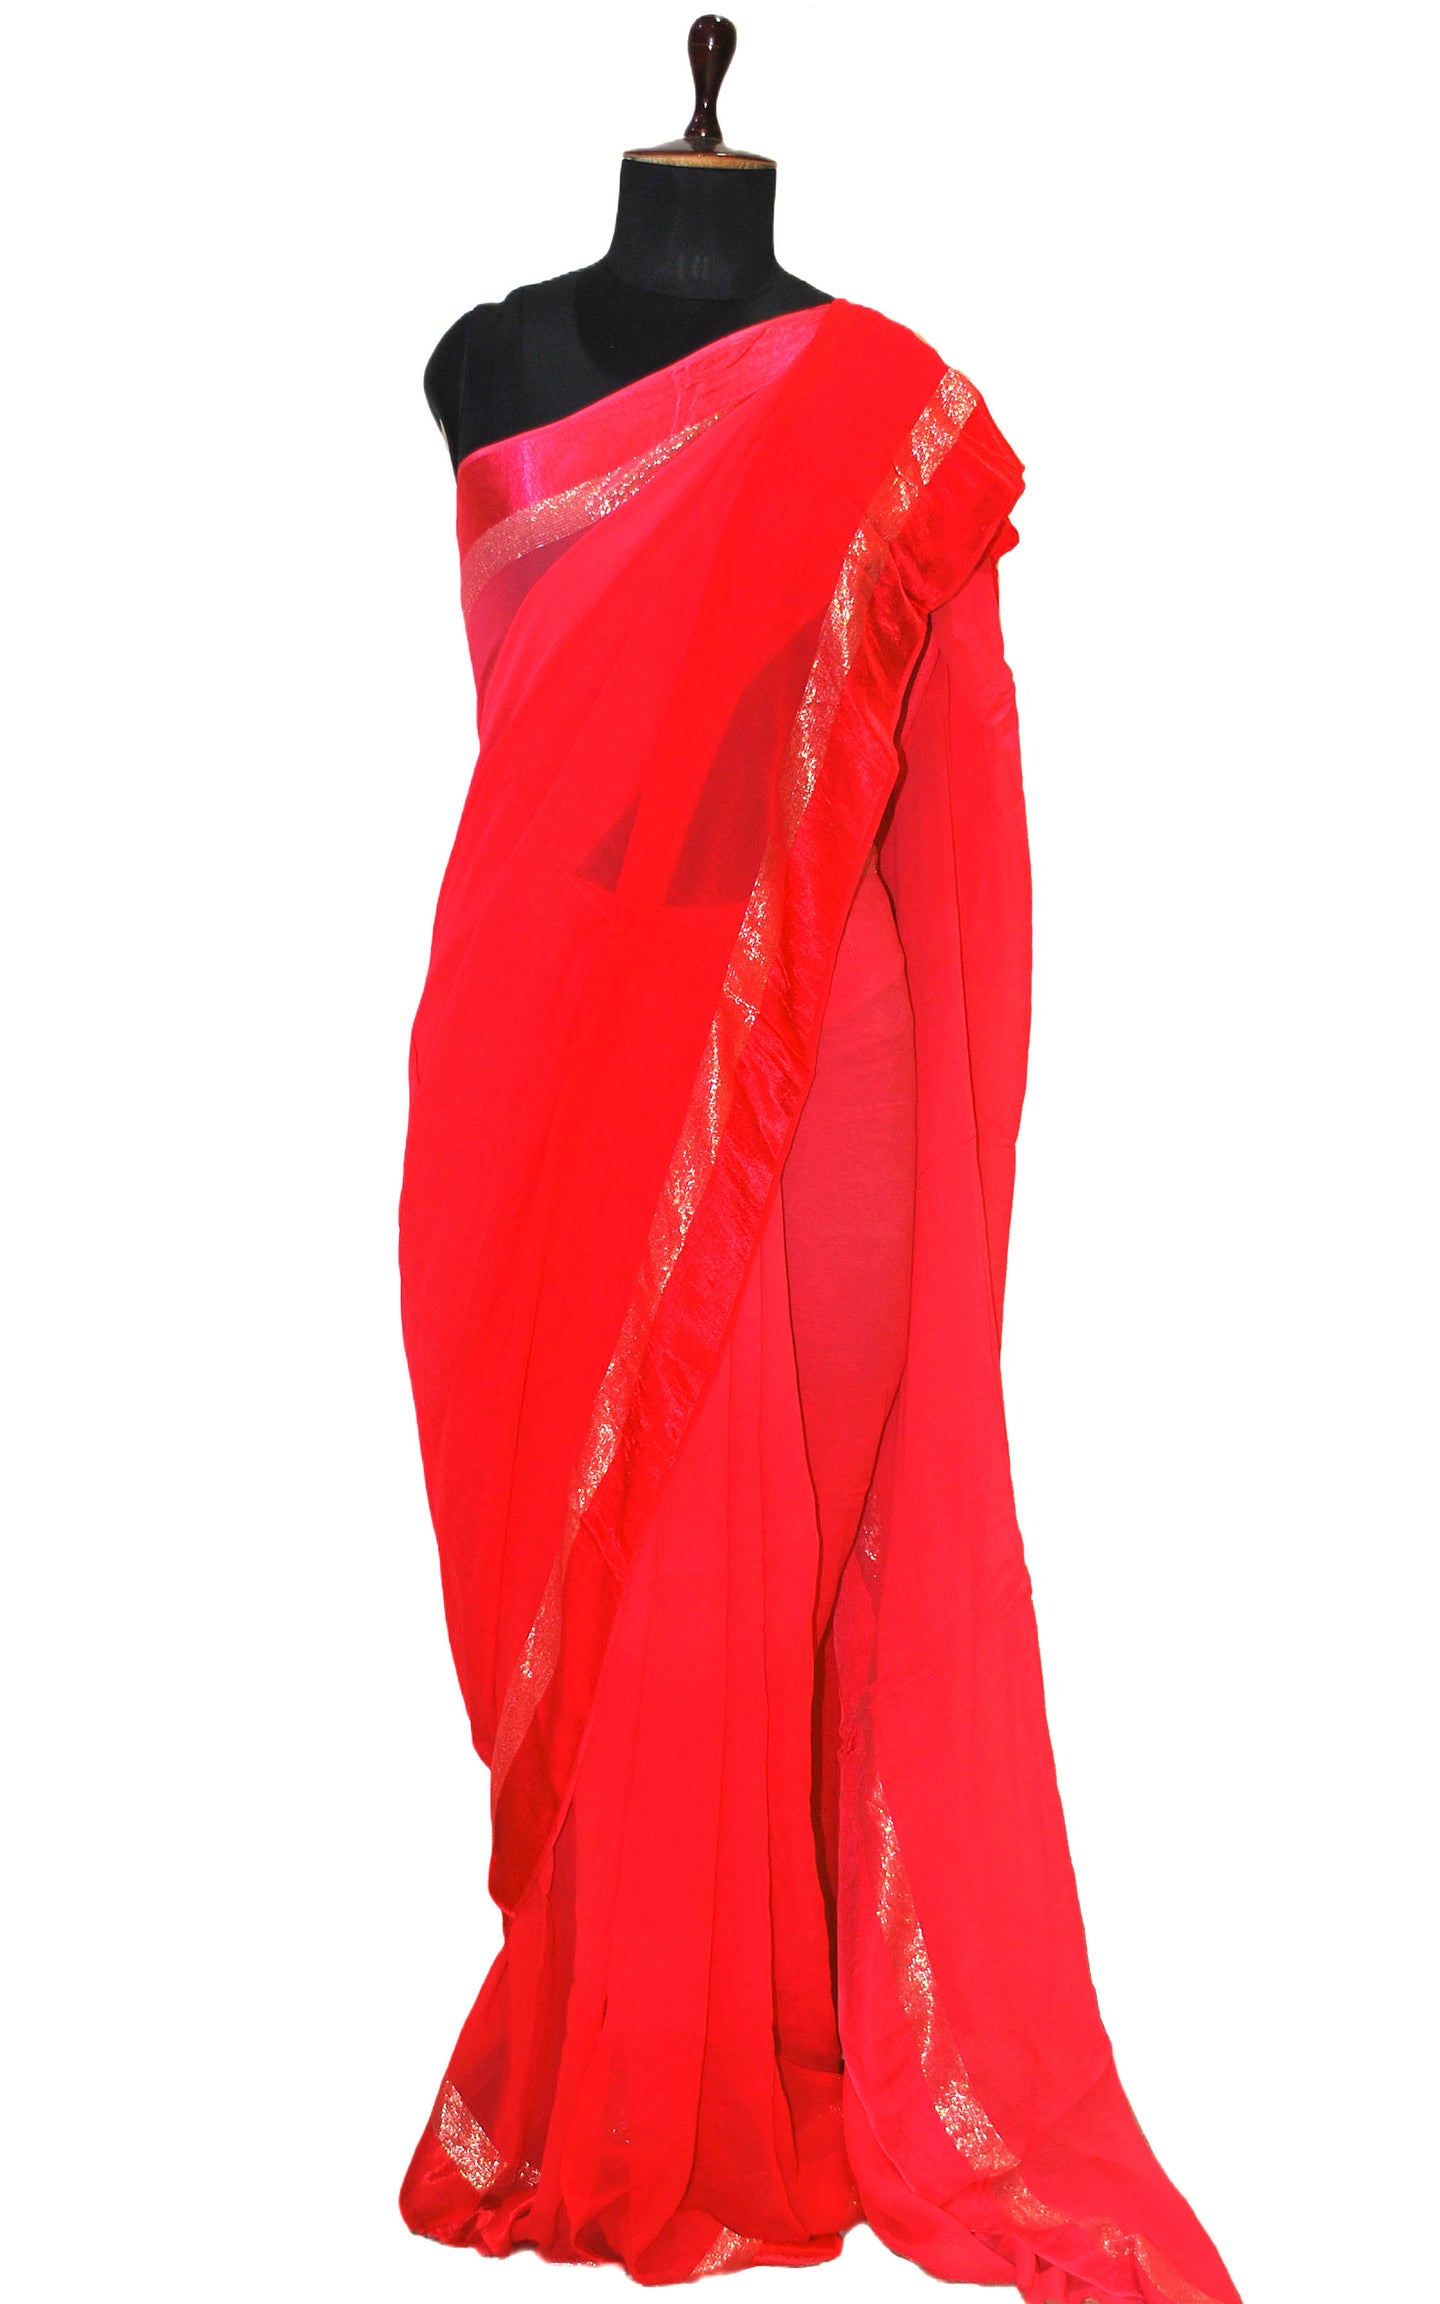 Designer Dual Shaded Georgette Saree in Paradise Pink and Silver Zari Work